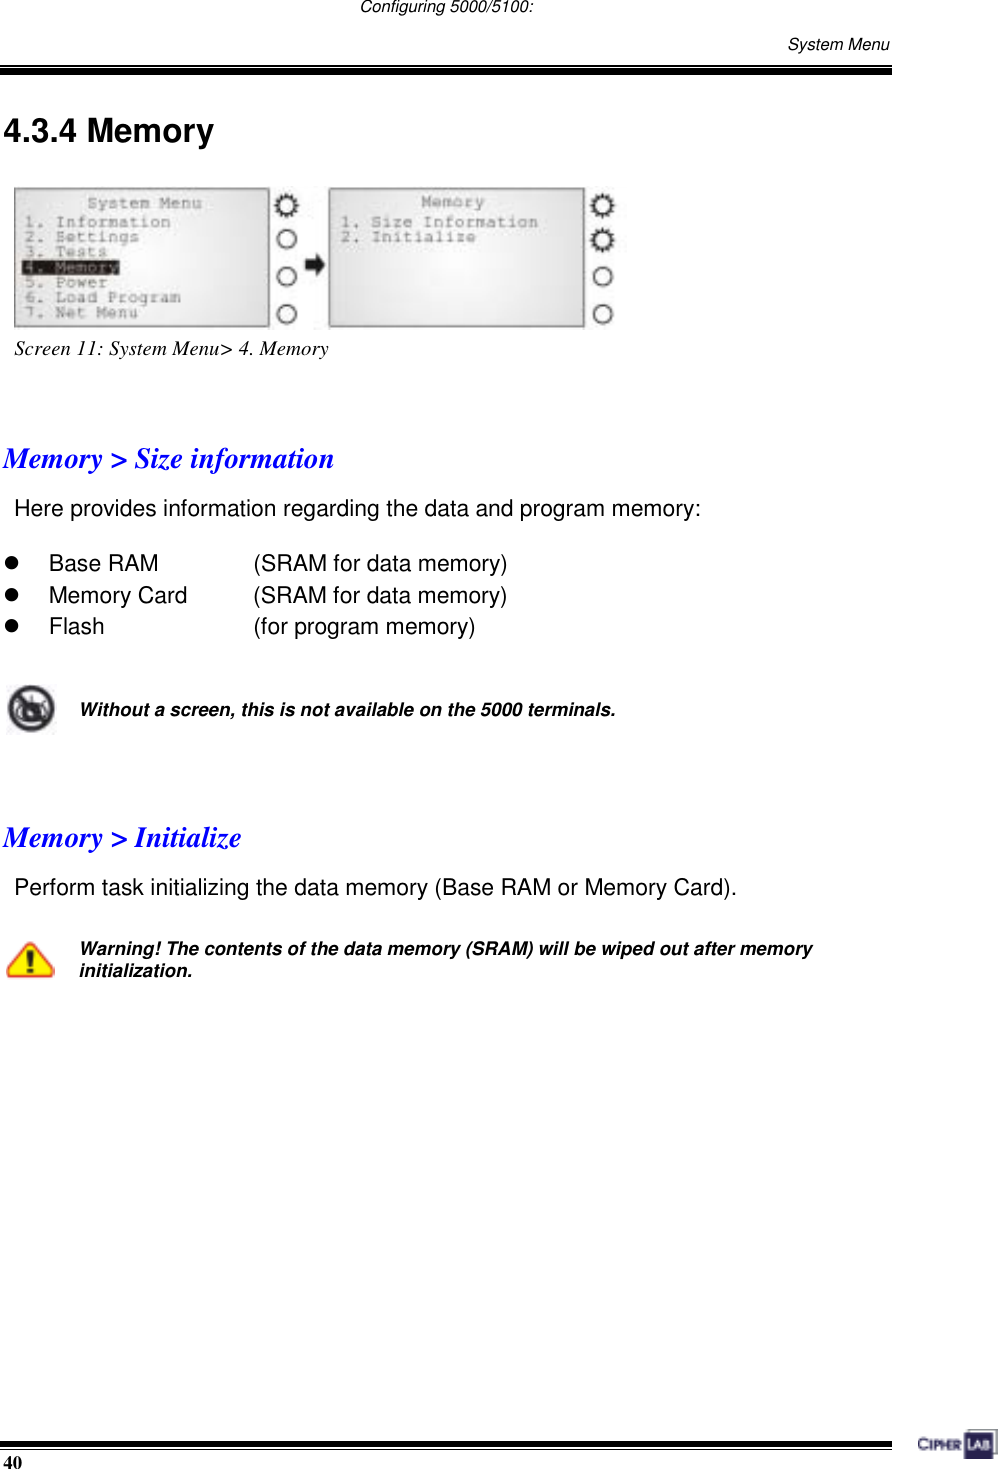  40                                                                                   Configuring 5000/5100:    System Menu 4.3.4 Memory  Screen 11: System Menu&gt; 4. Memory   Memory &gt; Size information Here provides information regarding the data and program memory:    Base RAM    (SRAM for data memory)   Memory Card    (SRAM for data memory)   Flash   (for program memory)   Without a screen, this is not available on the 5000 terminals.   Memory &gt; Initialize Perform task initializing the data memory (Base RAM or Memory Card).   Warning! The contents of the data memory (SRAM) will be wiped out after memory initialization.       